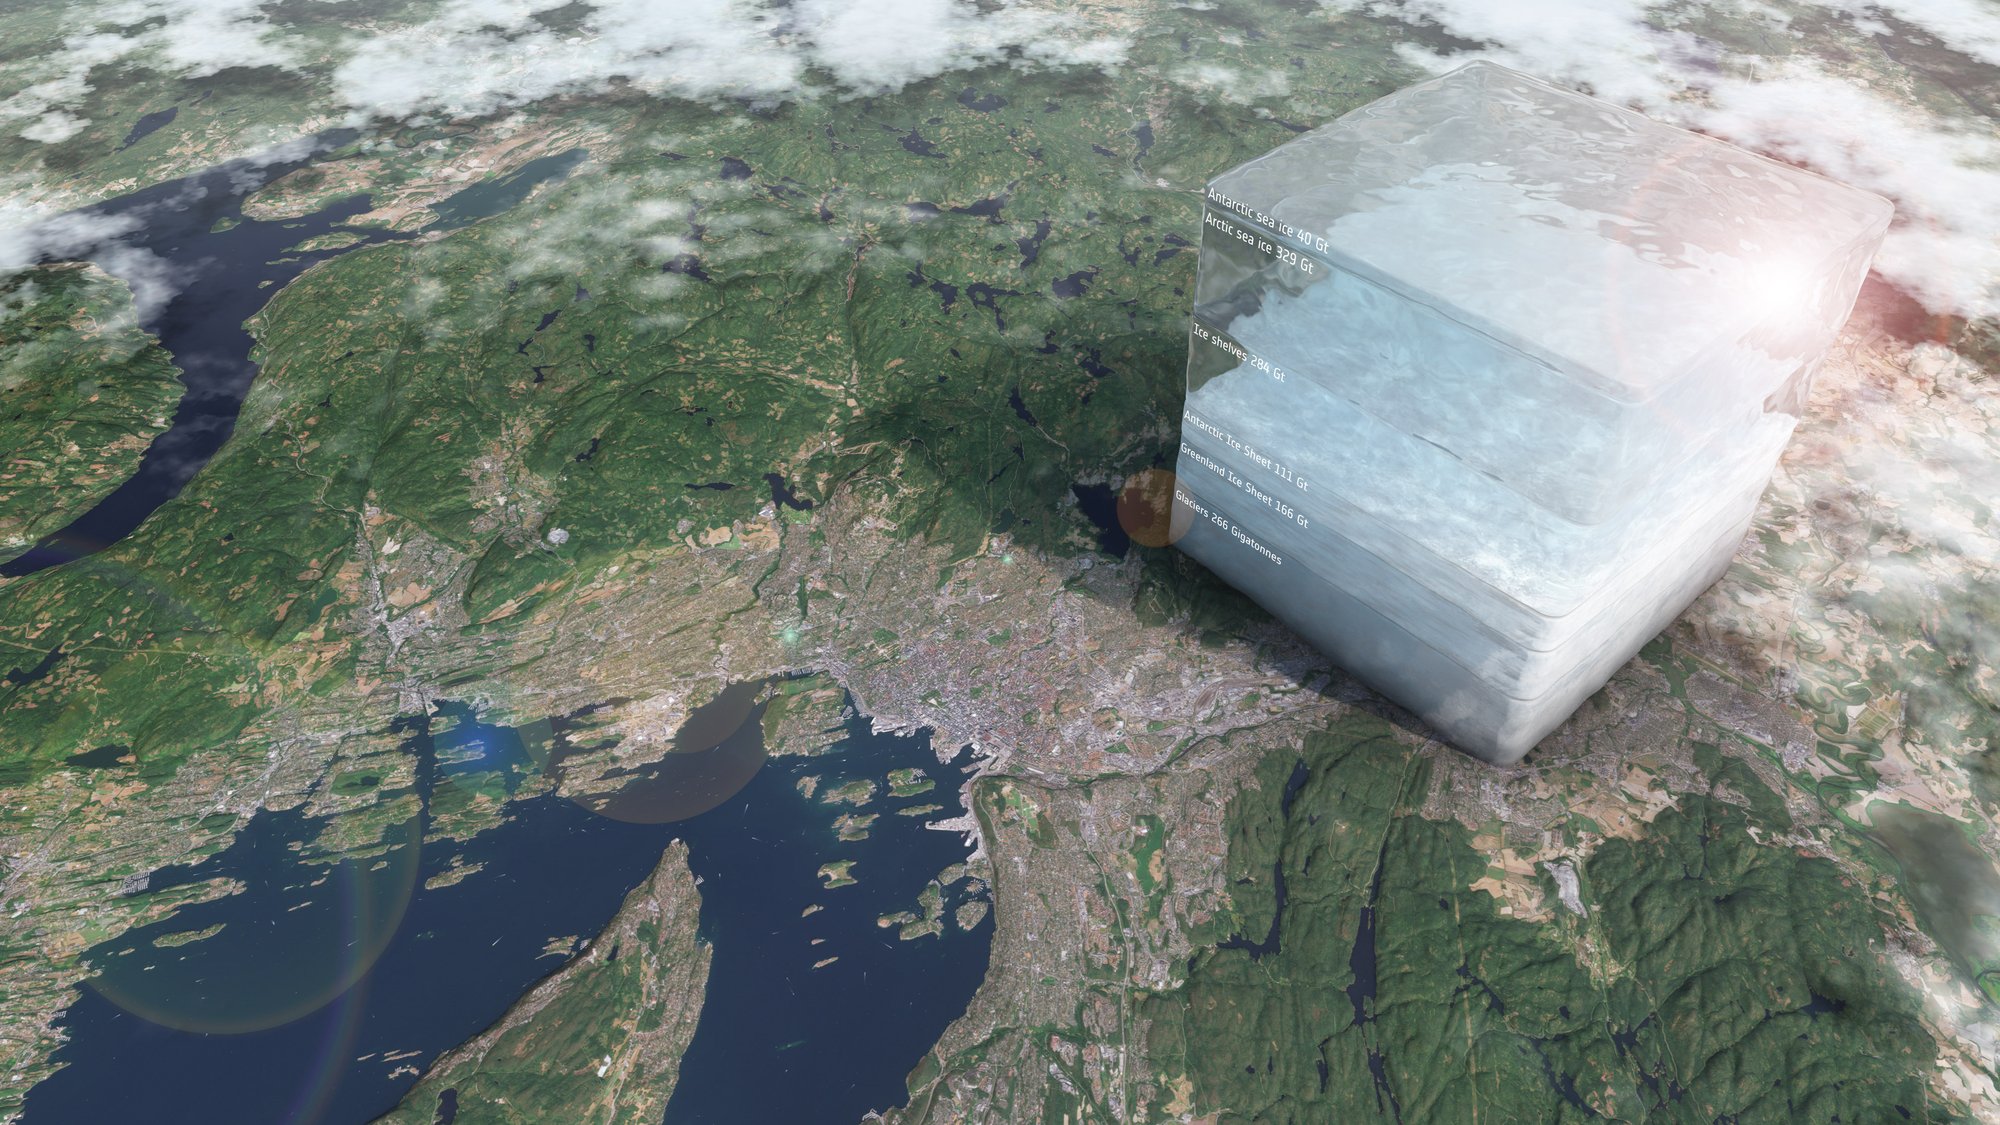 Ice loss in perspective. This ice cube looming over the Oslo skyline, measures 10x10x10 km and represents the amount of ice lost globally (including from the Ice sheets)